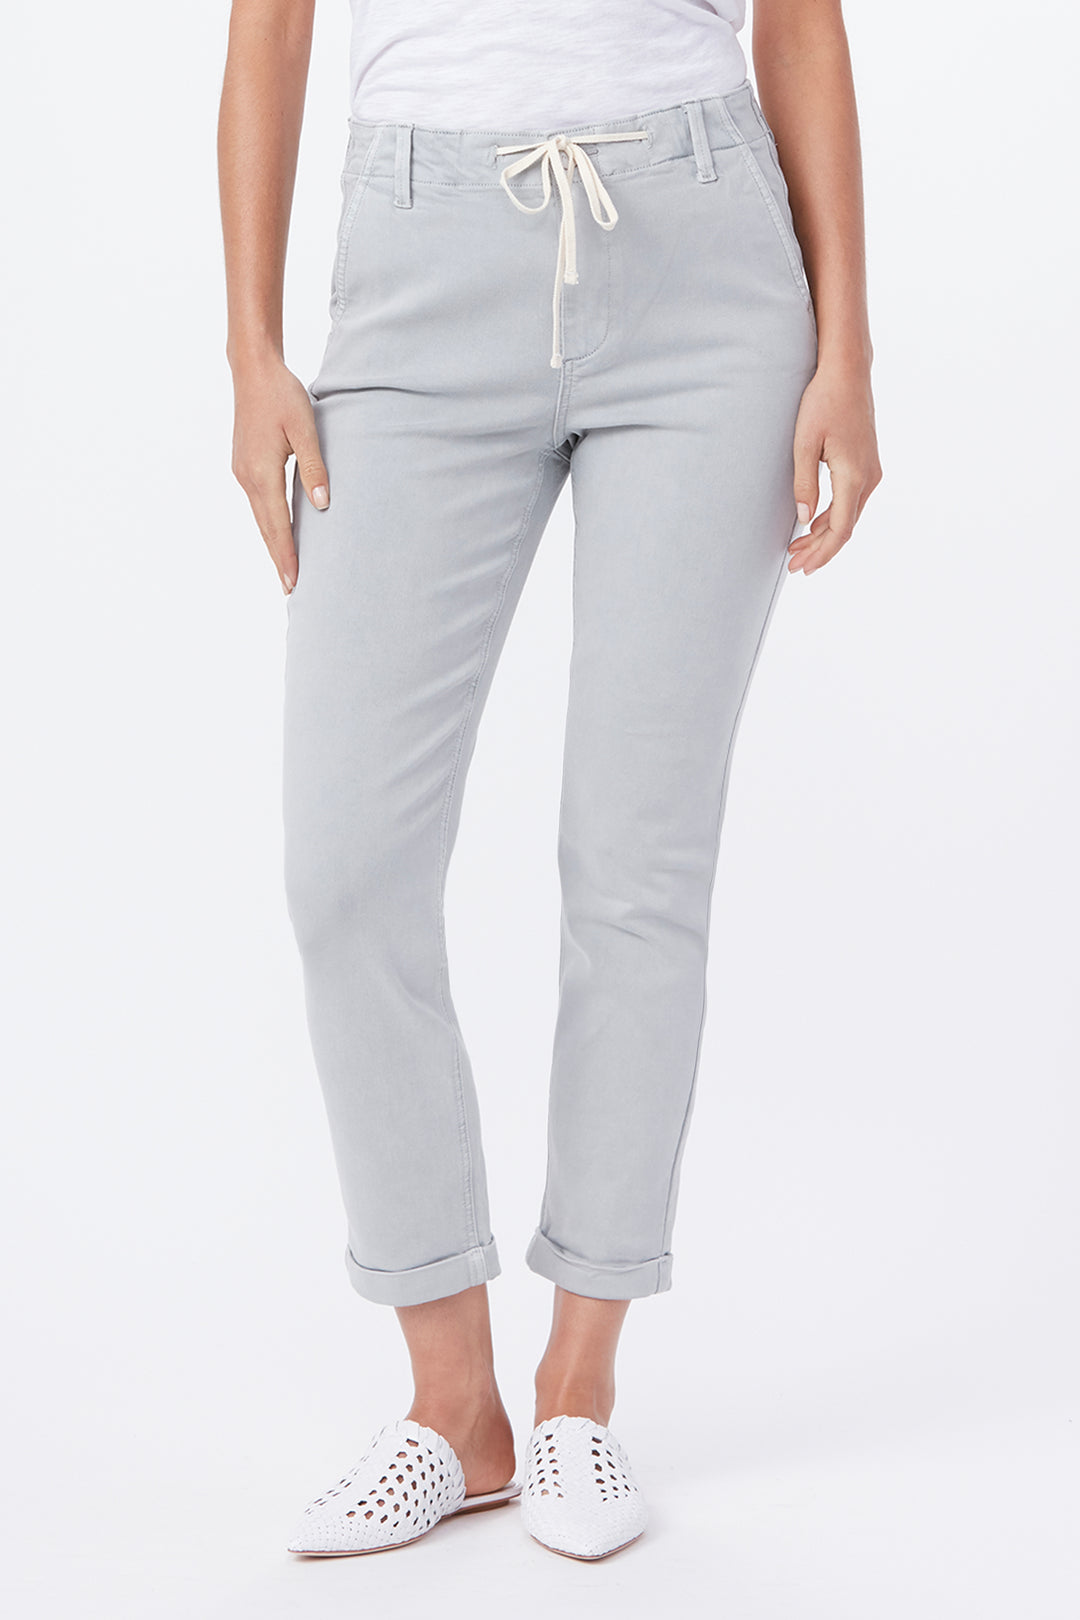 Paige - Christy Pant in Vintage Grey Cove